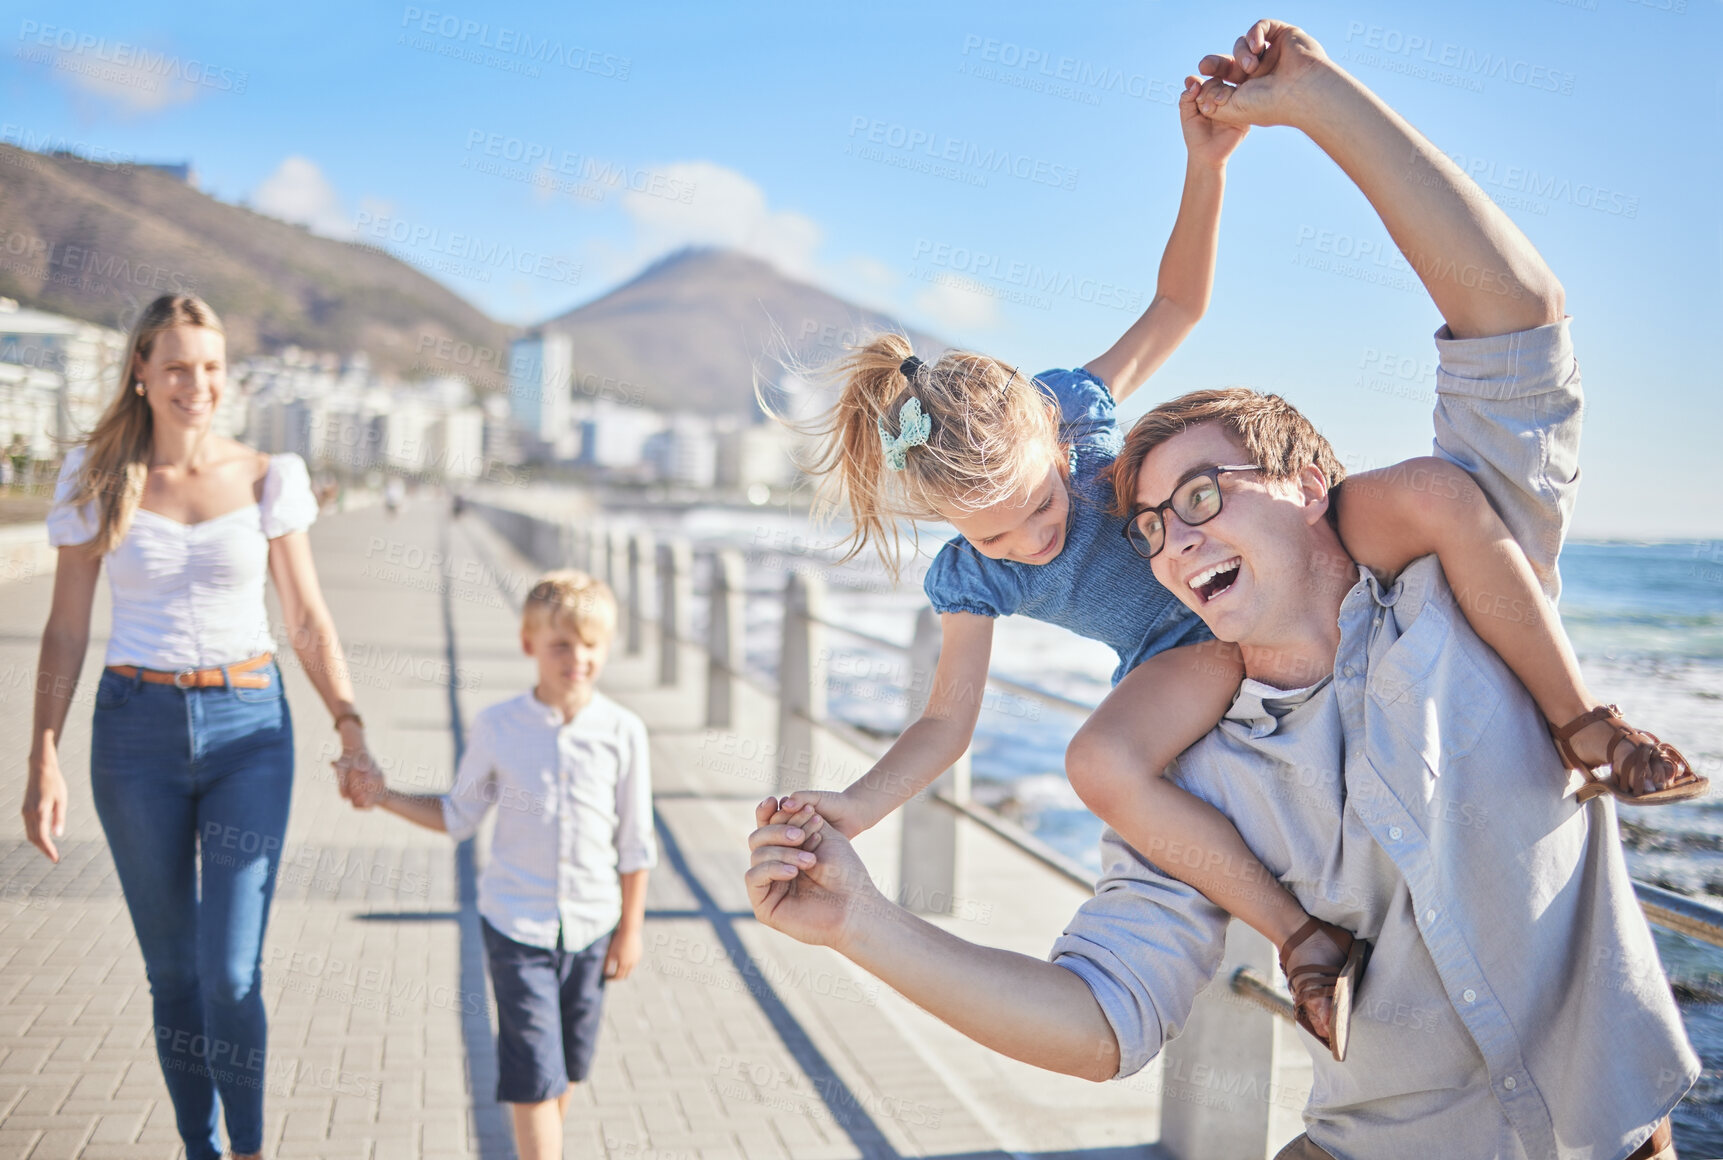 Buy stock photo Cheerful caucasian father carrying his daughter on his shoulders being playful and having fun while his wife and son follows in the background on a seaside promenade